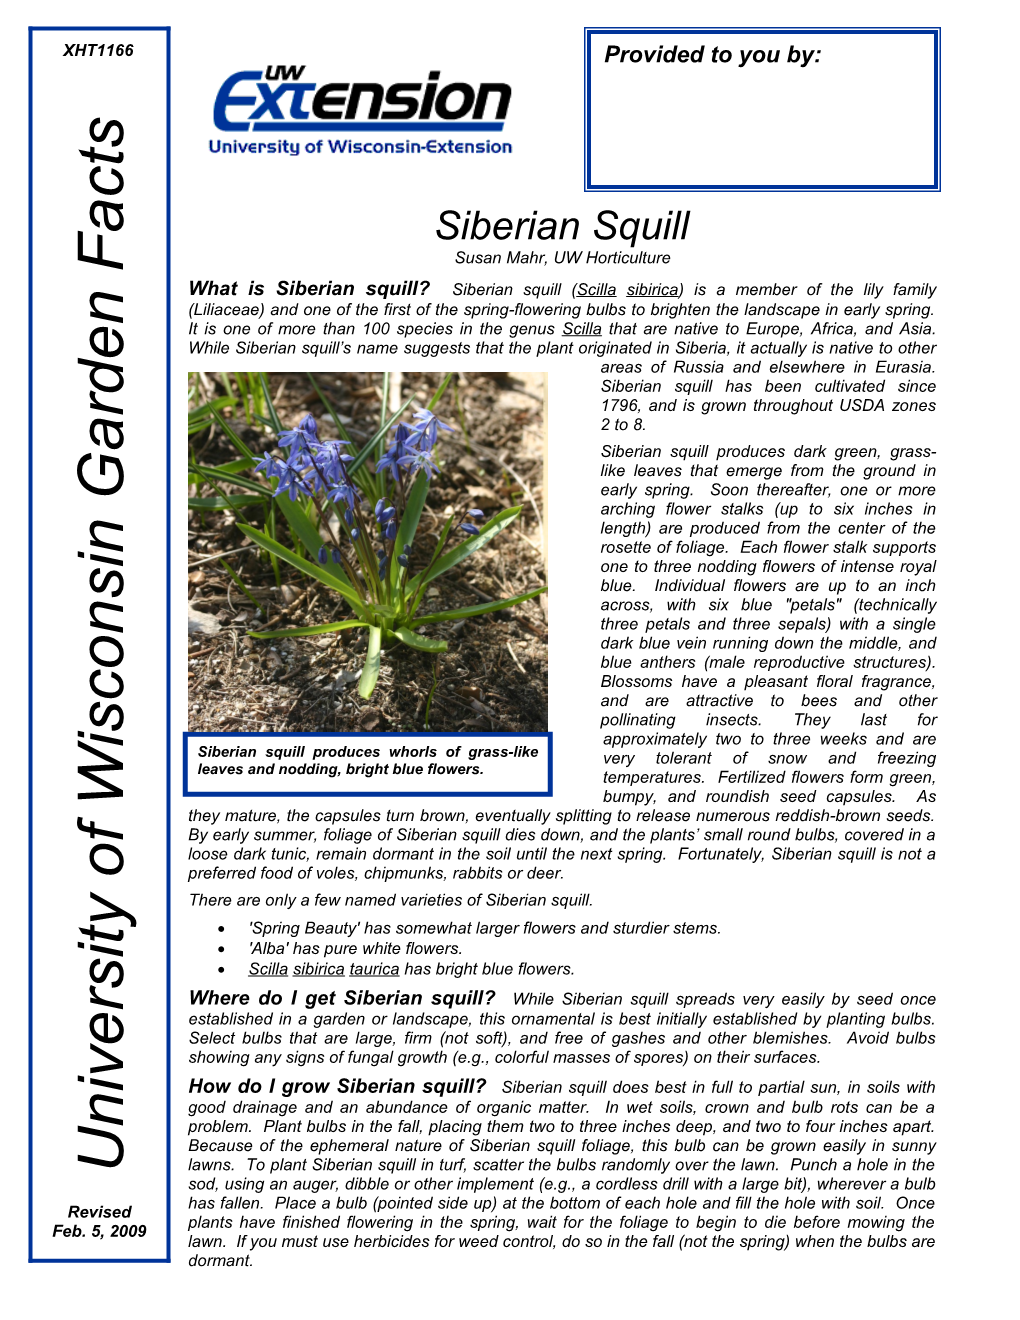 There Are Only a Few Named Varieties of Siberian Squill